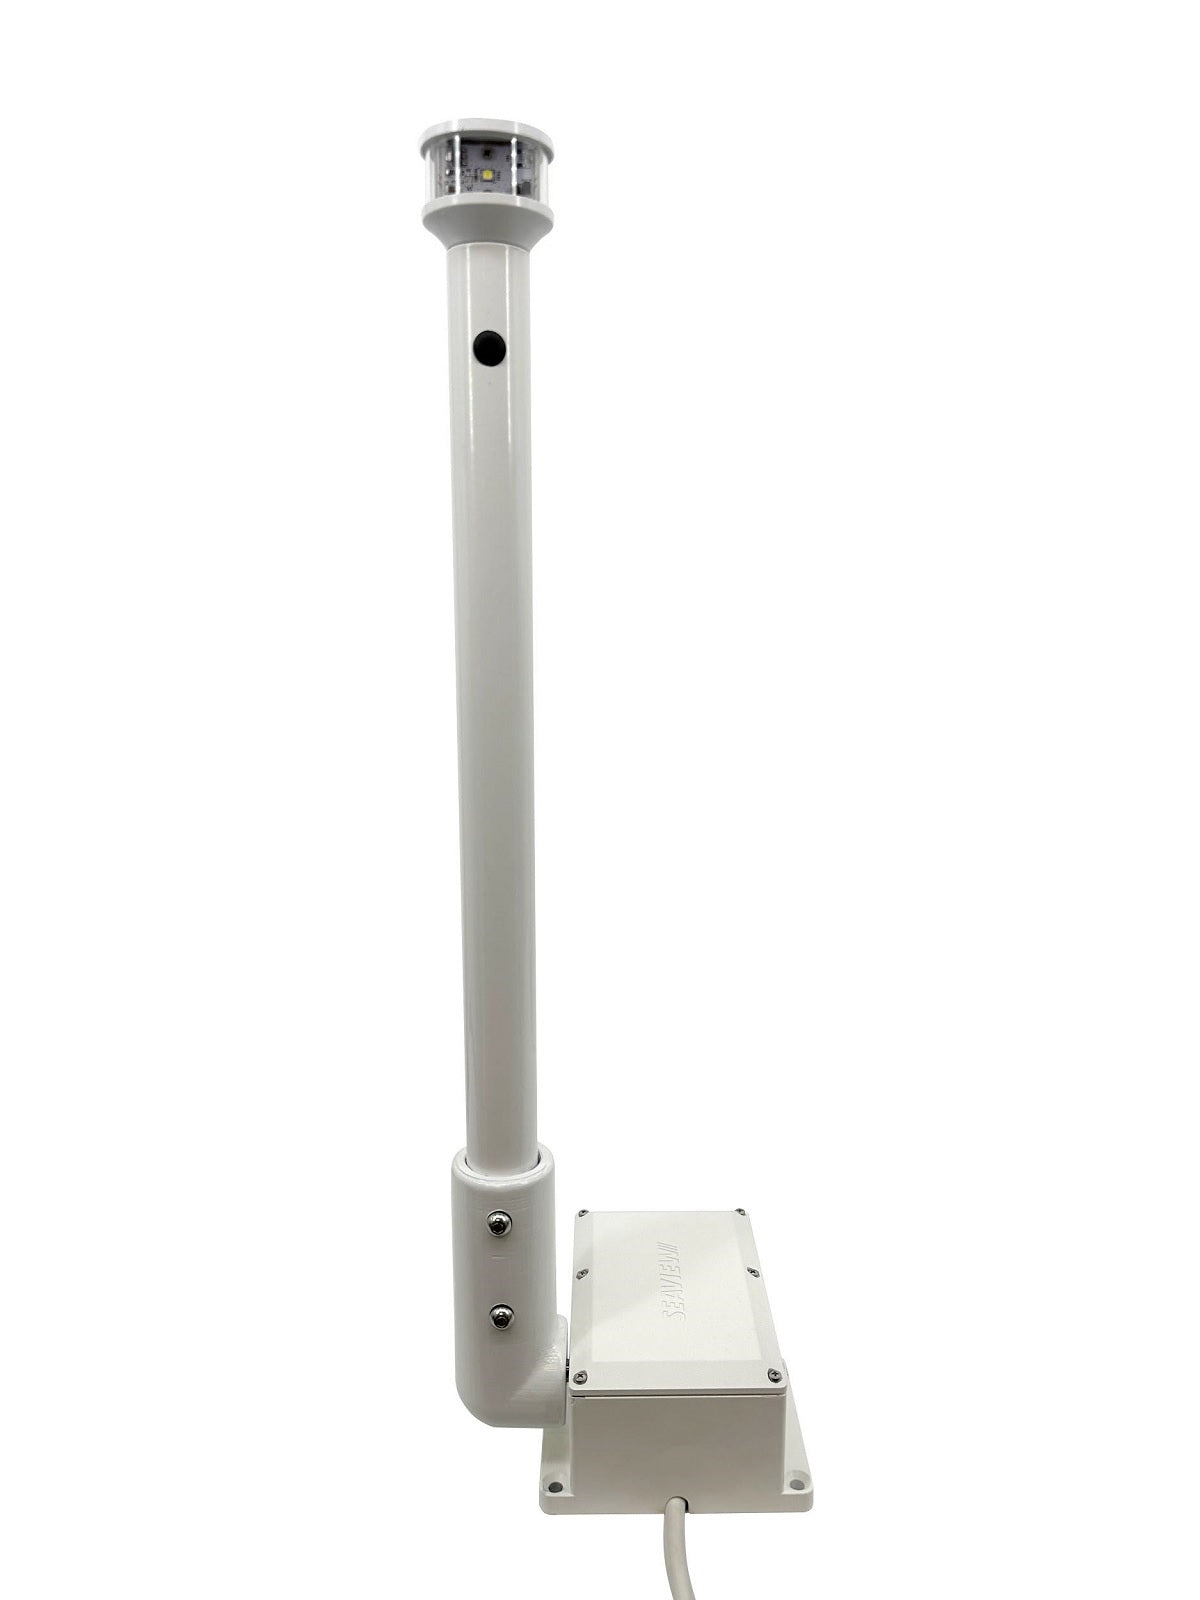 Seaview 24" Light Post Electrically Folding Requires Light Bar Top